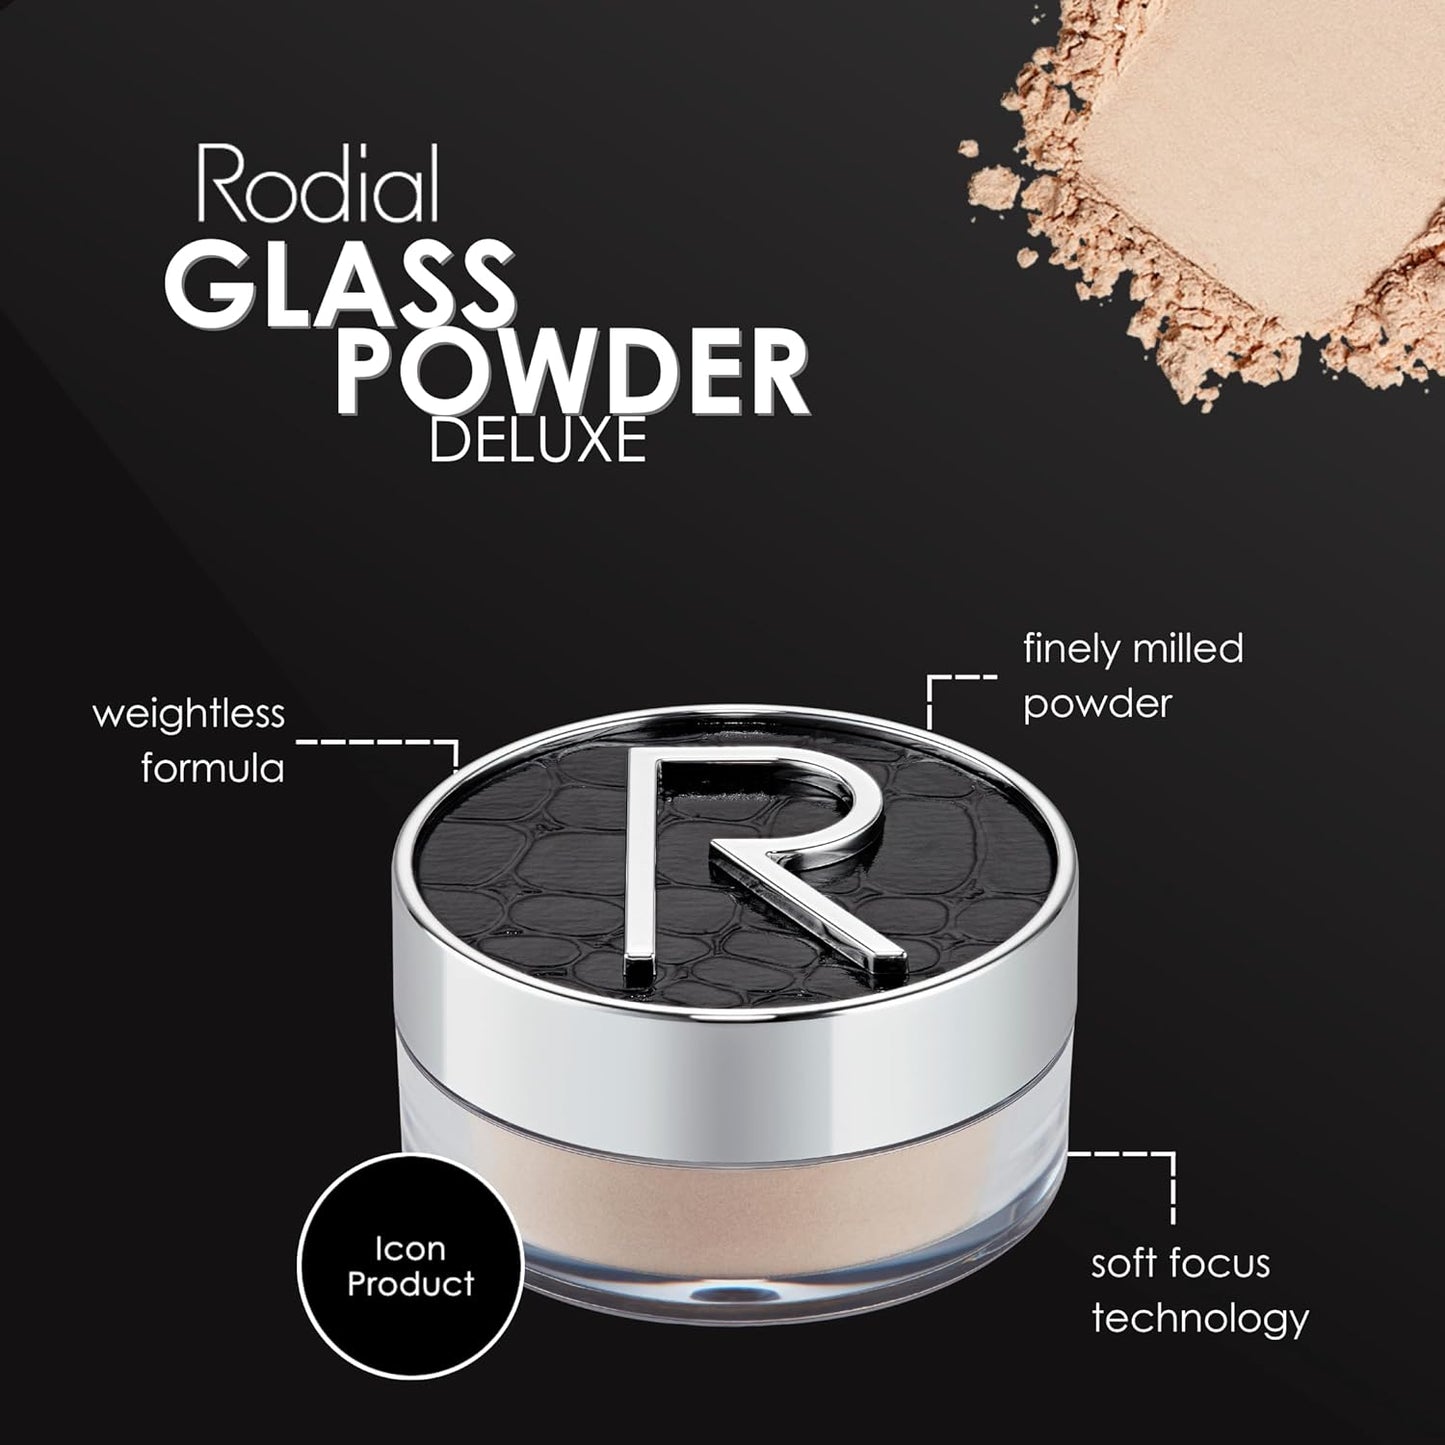 Rodial Glass Powder Deluxe